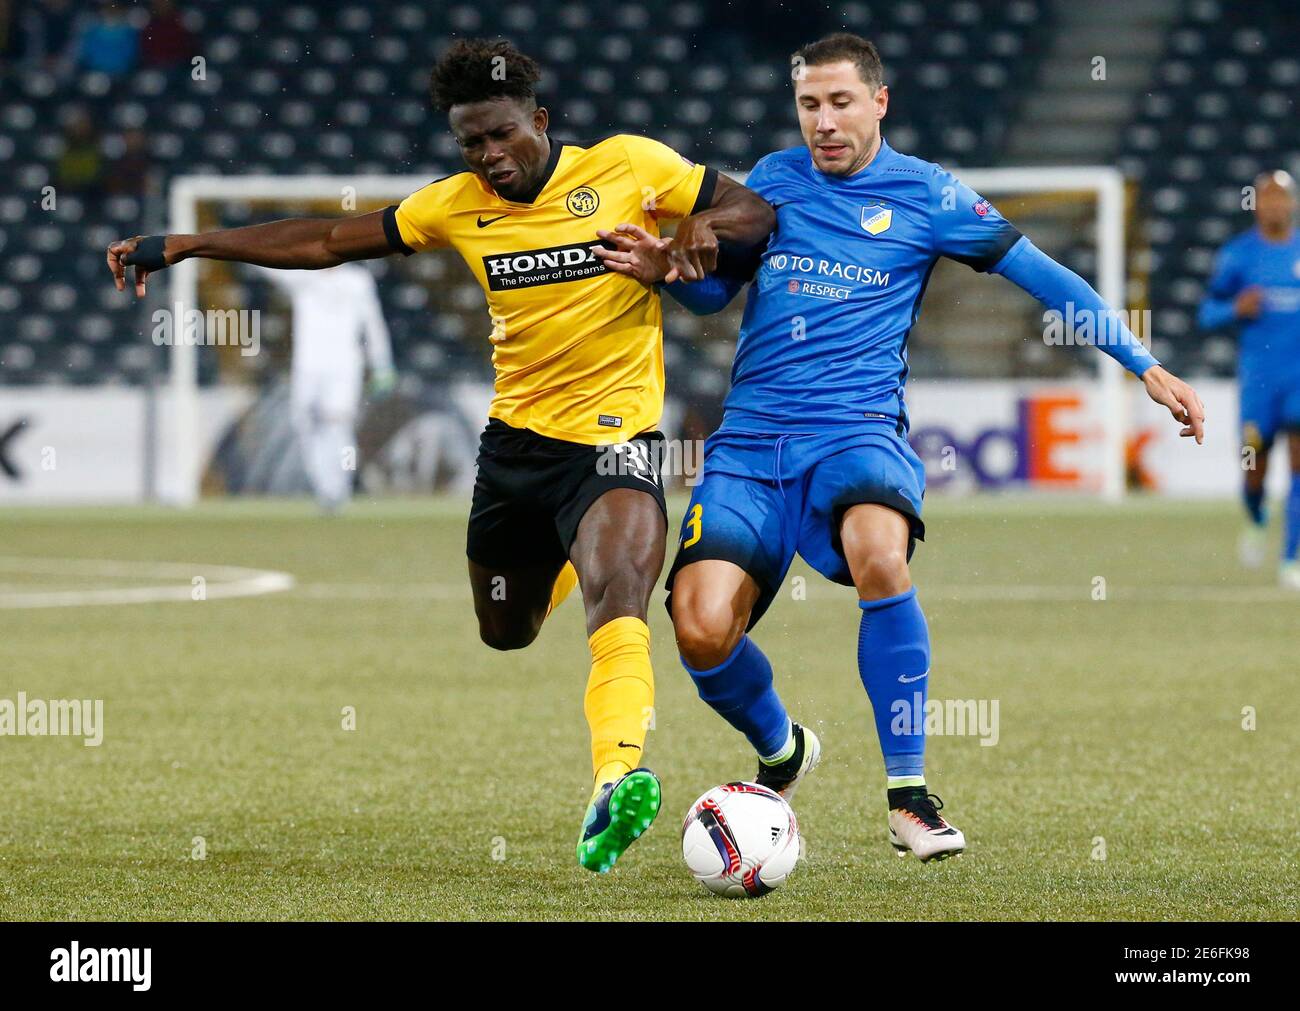 Football Soccer - BSC Young Boys v Apoel FC - UEFA Europa League group  stage - Stade de Suisse, Bern, Switzerland - 20/10/16 BSC Young Boys' Sekou  Sanogo fights for the ball